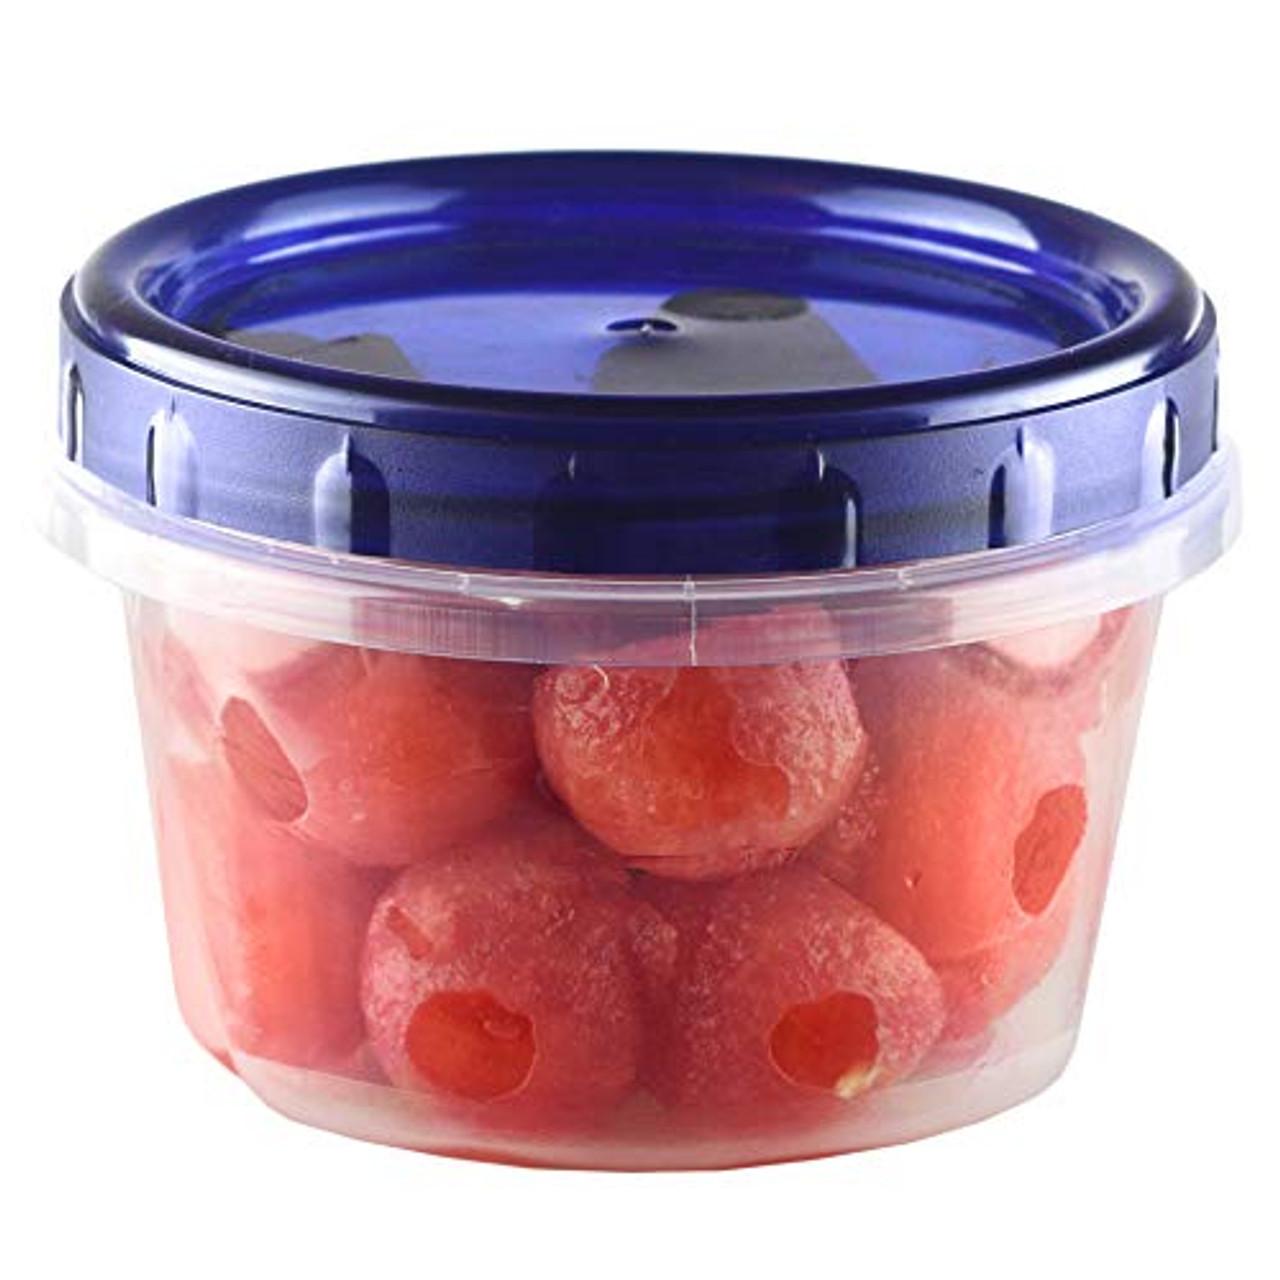 Elegant Disposables (4 Ounce 10 Pack) Twist Cap Containers Clear Bottom with Red Top Screw on Lids Twist Top Food Storage Freezer Reusable Containers